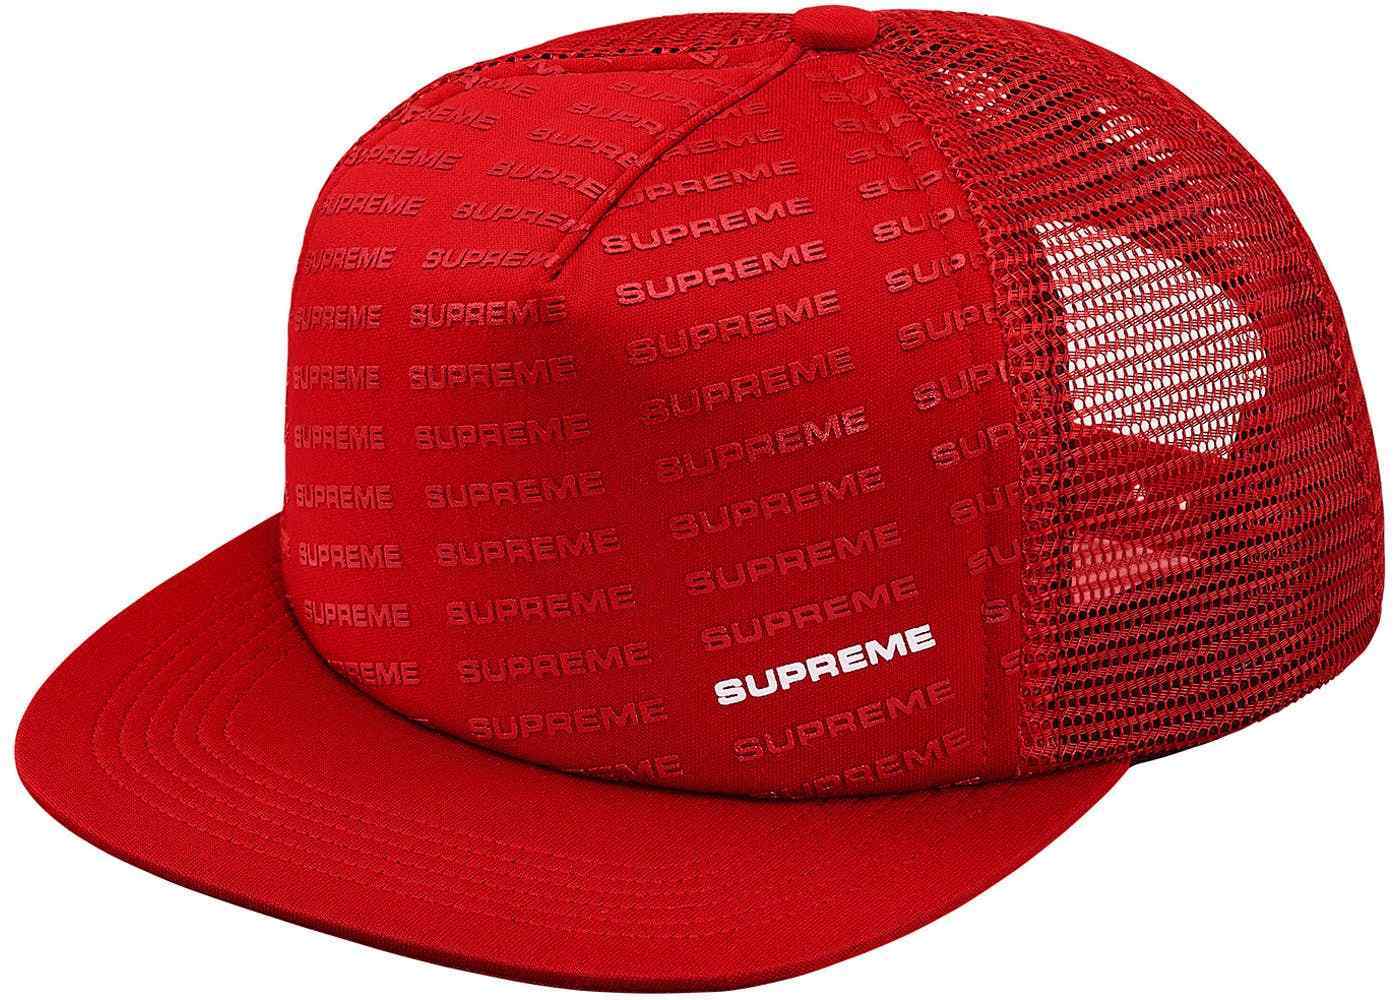 S a Red Box Logo - Donald Trump Schedule and Appearances